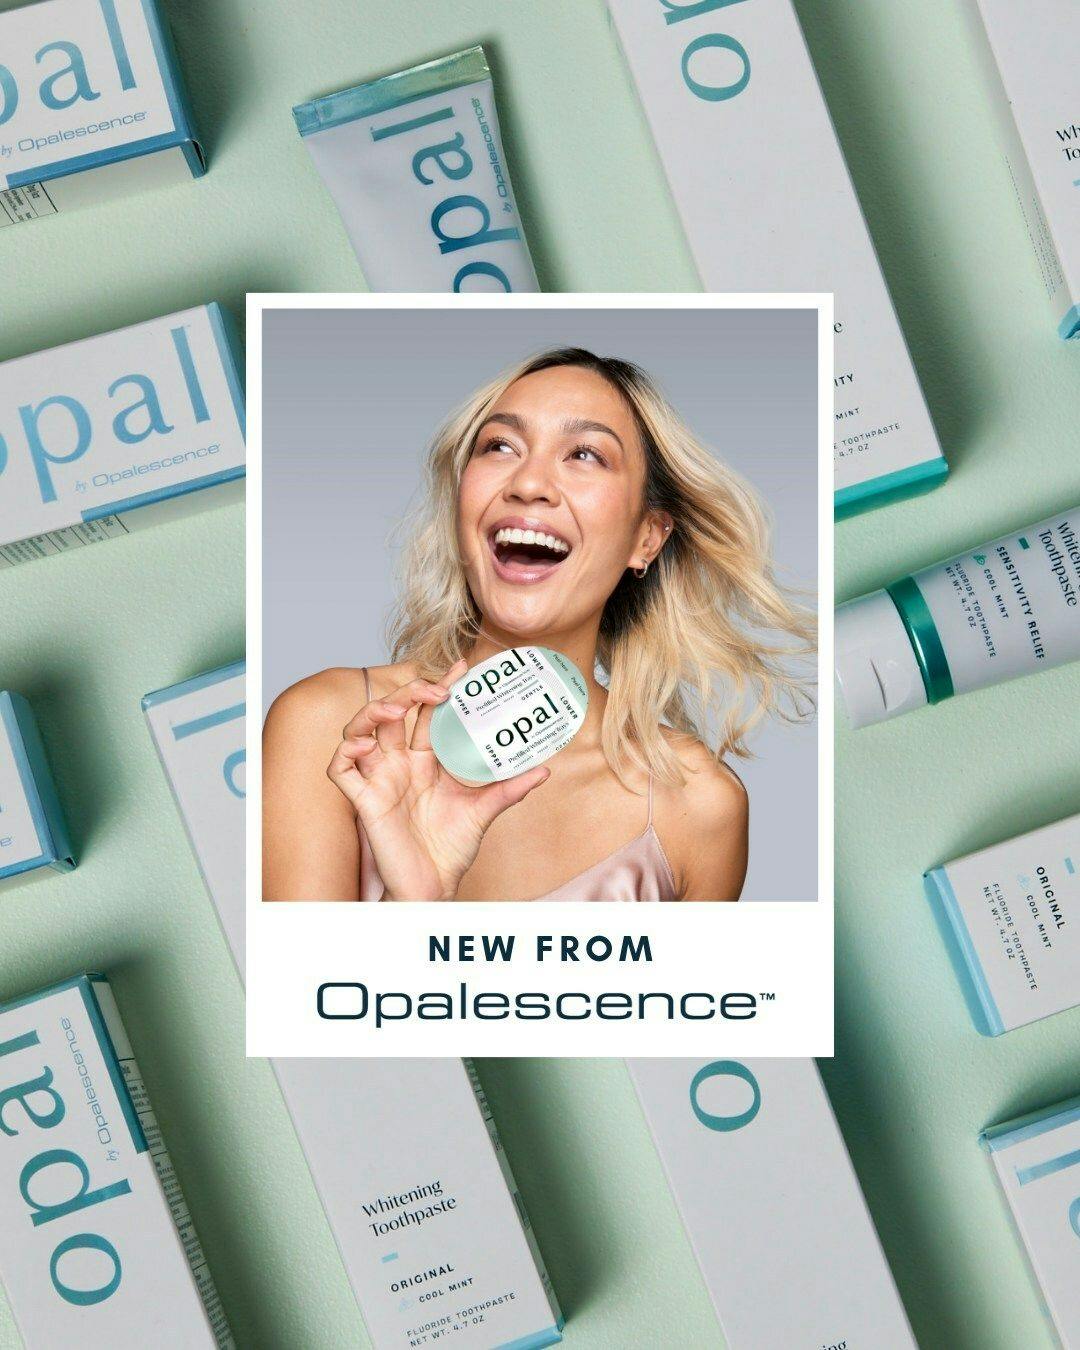 New Opal by Opalescence Teeth Whitening Line Available Direct to Consumers | Image Credit: © Opal by Opalescence 